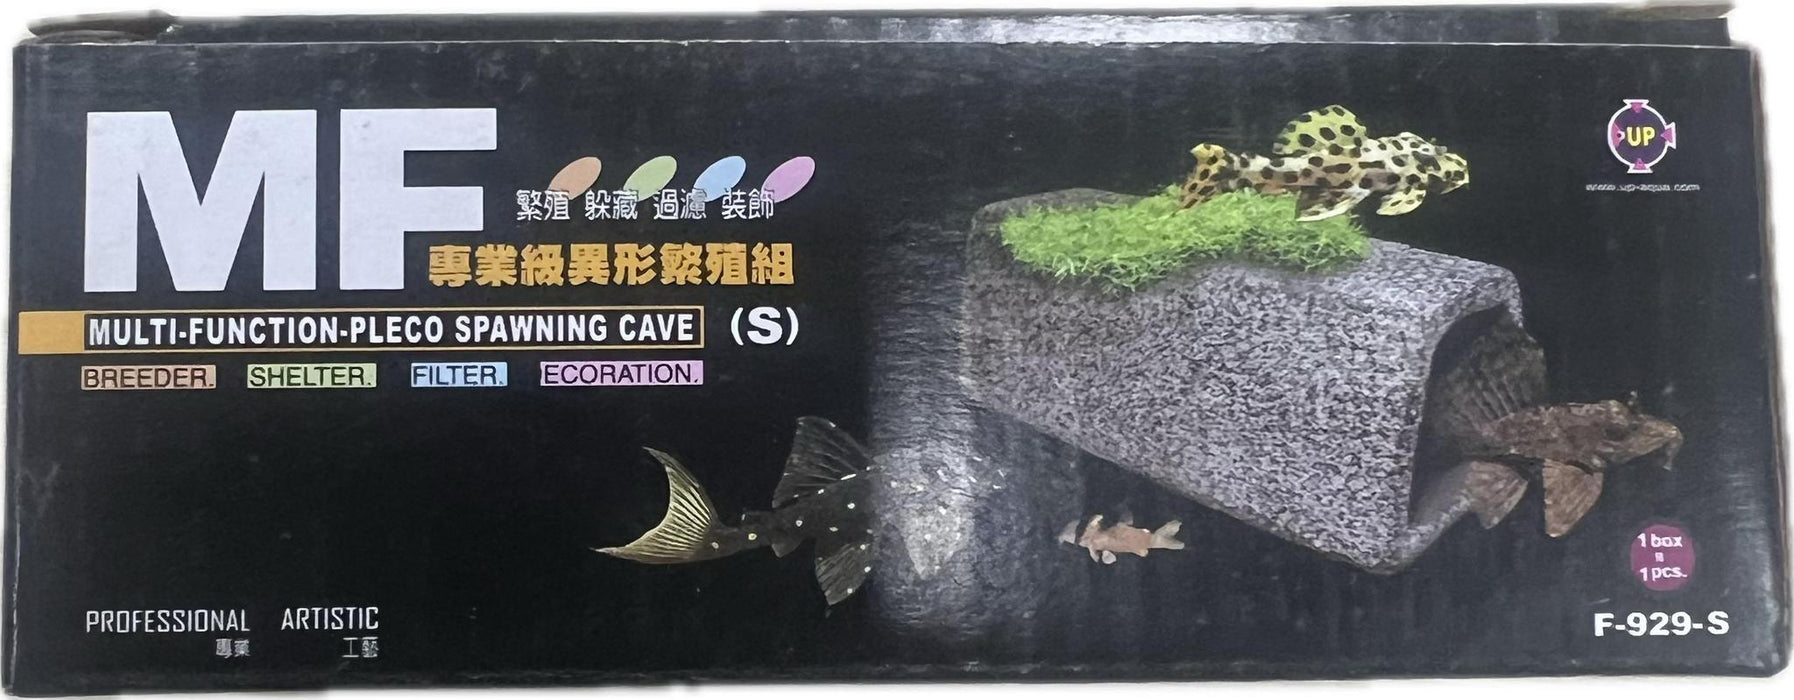 Up MF Multi-Function-Pleco Cave F-929-S